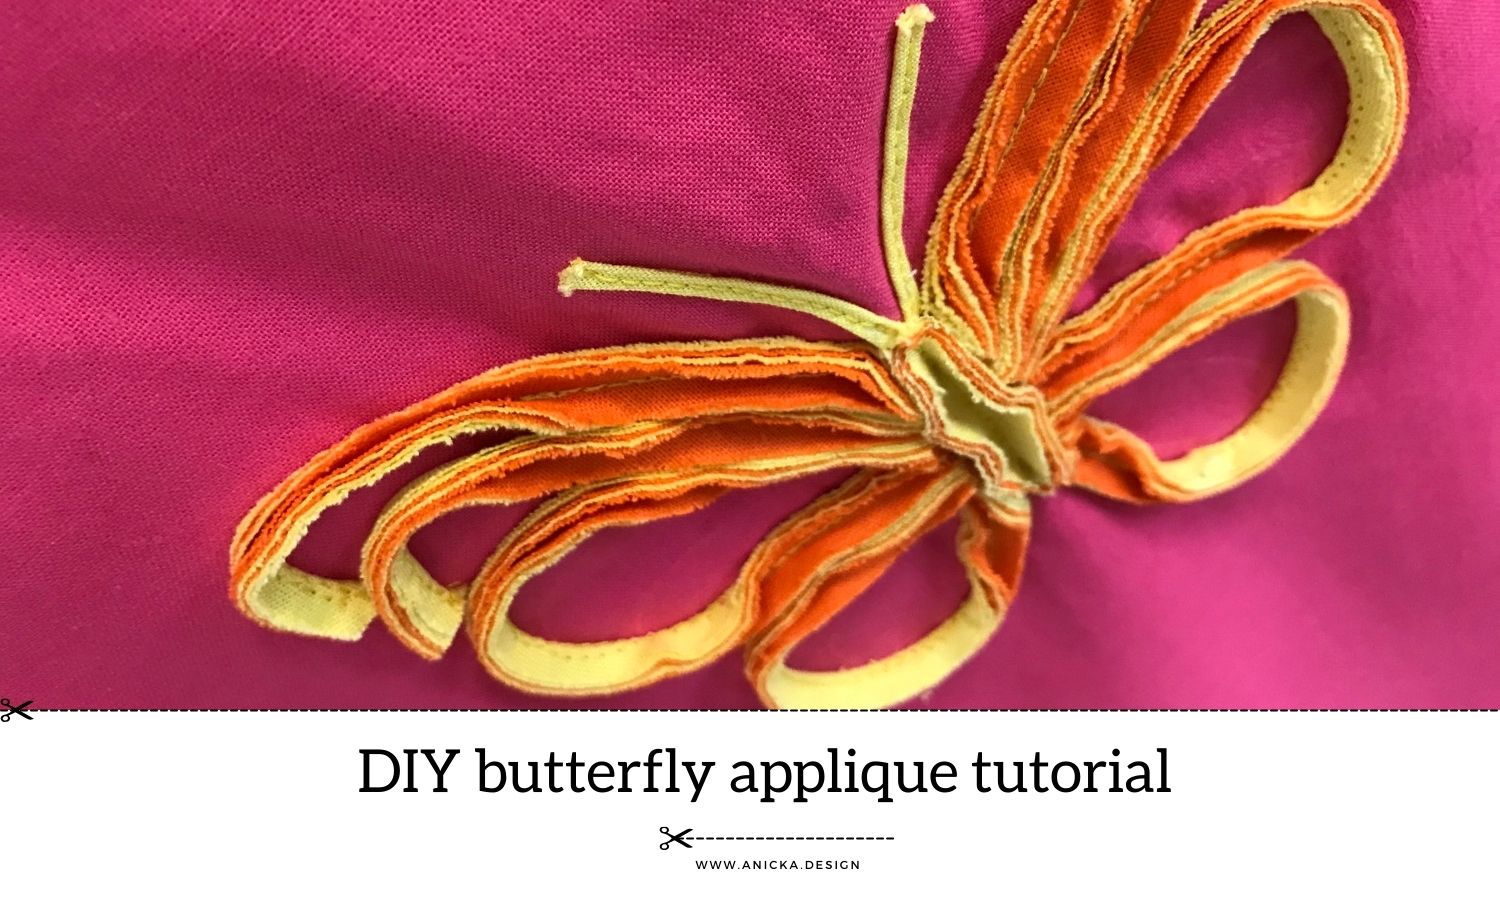 Faux chenille style butterfly applique made of fabric stripes.